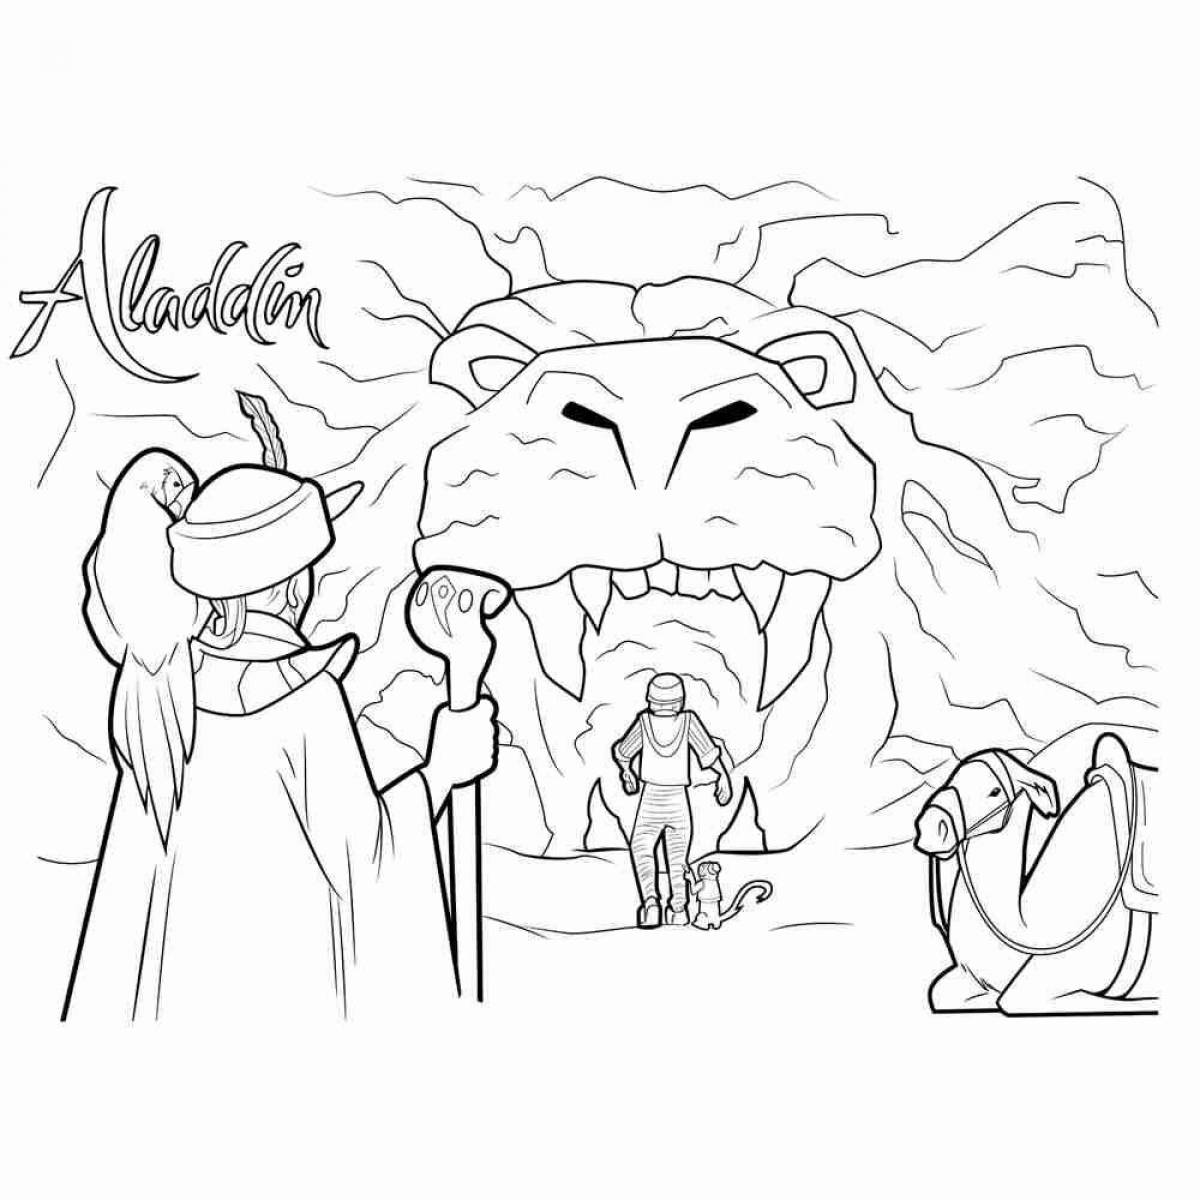 Fun coloring page of the cave club